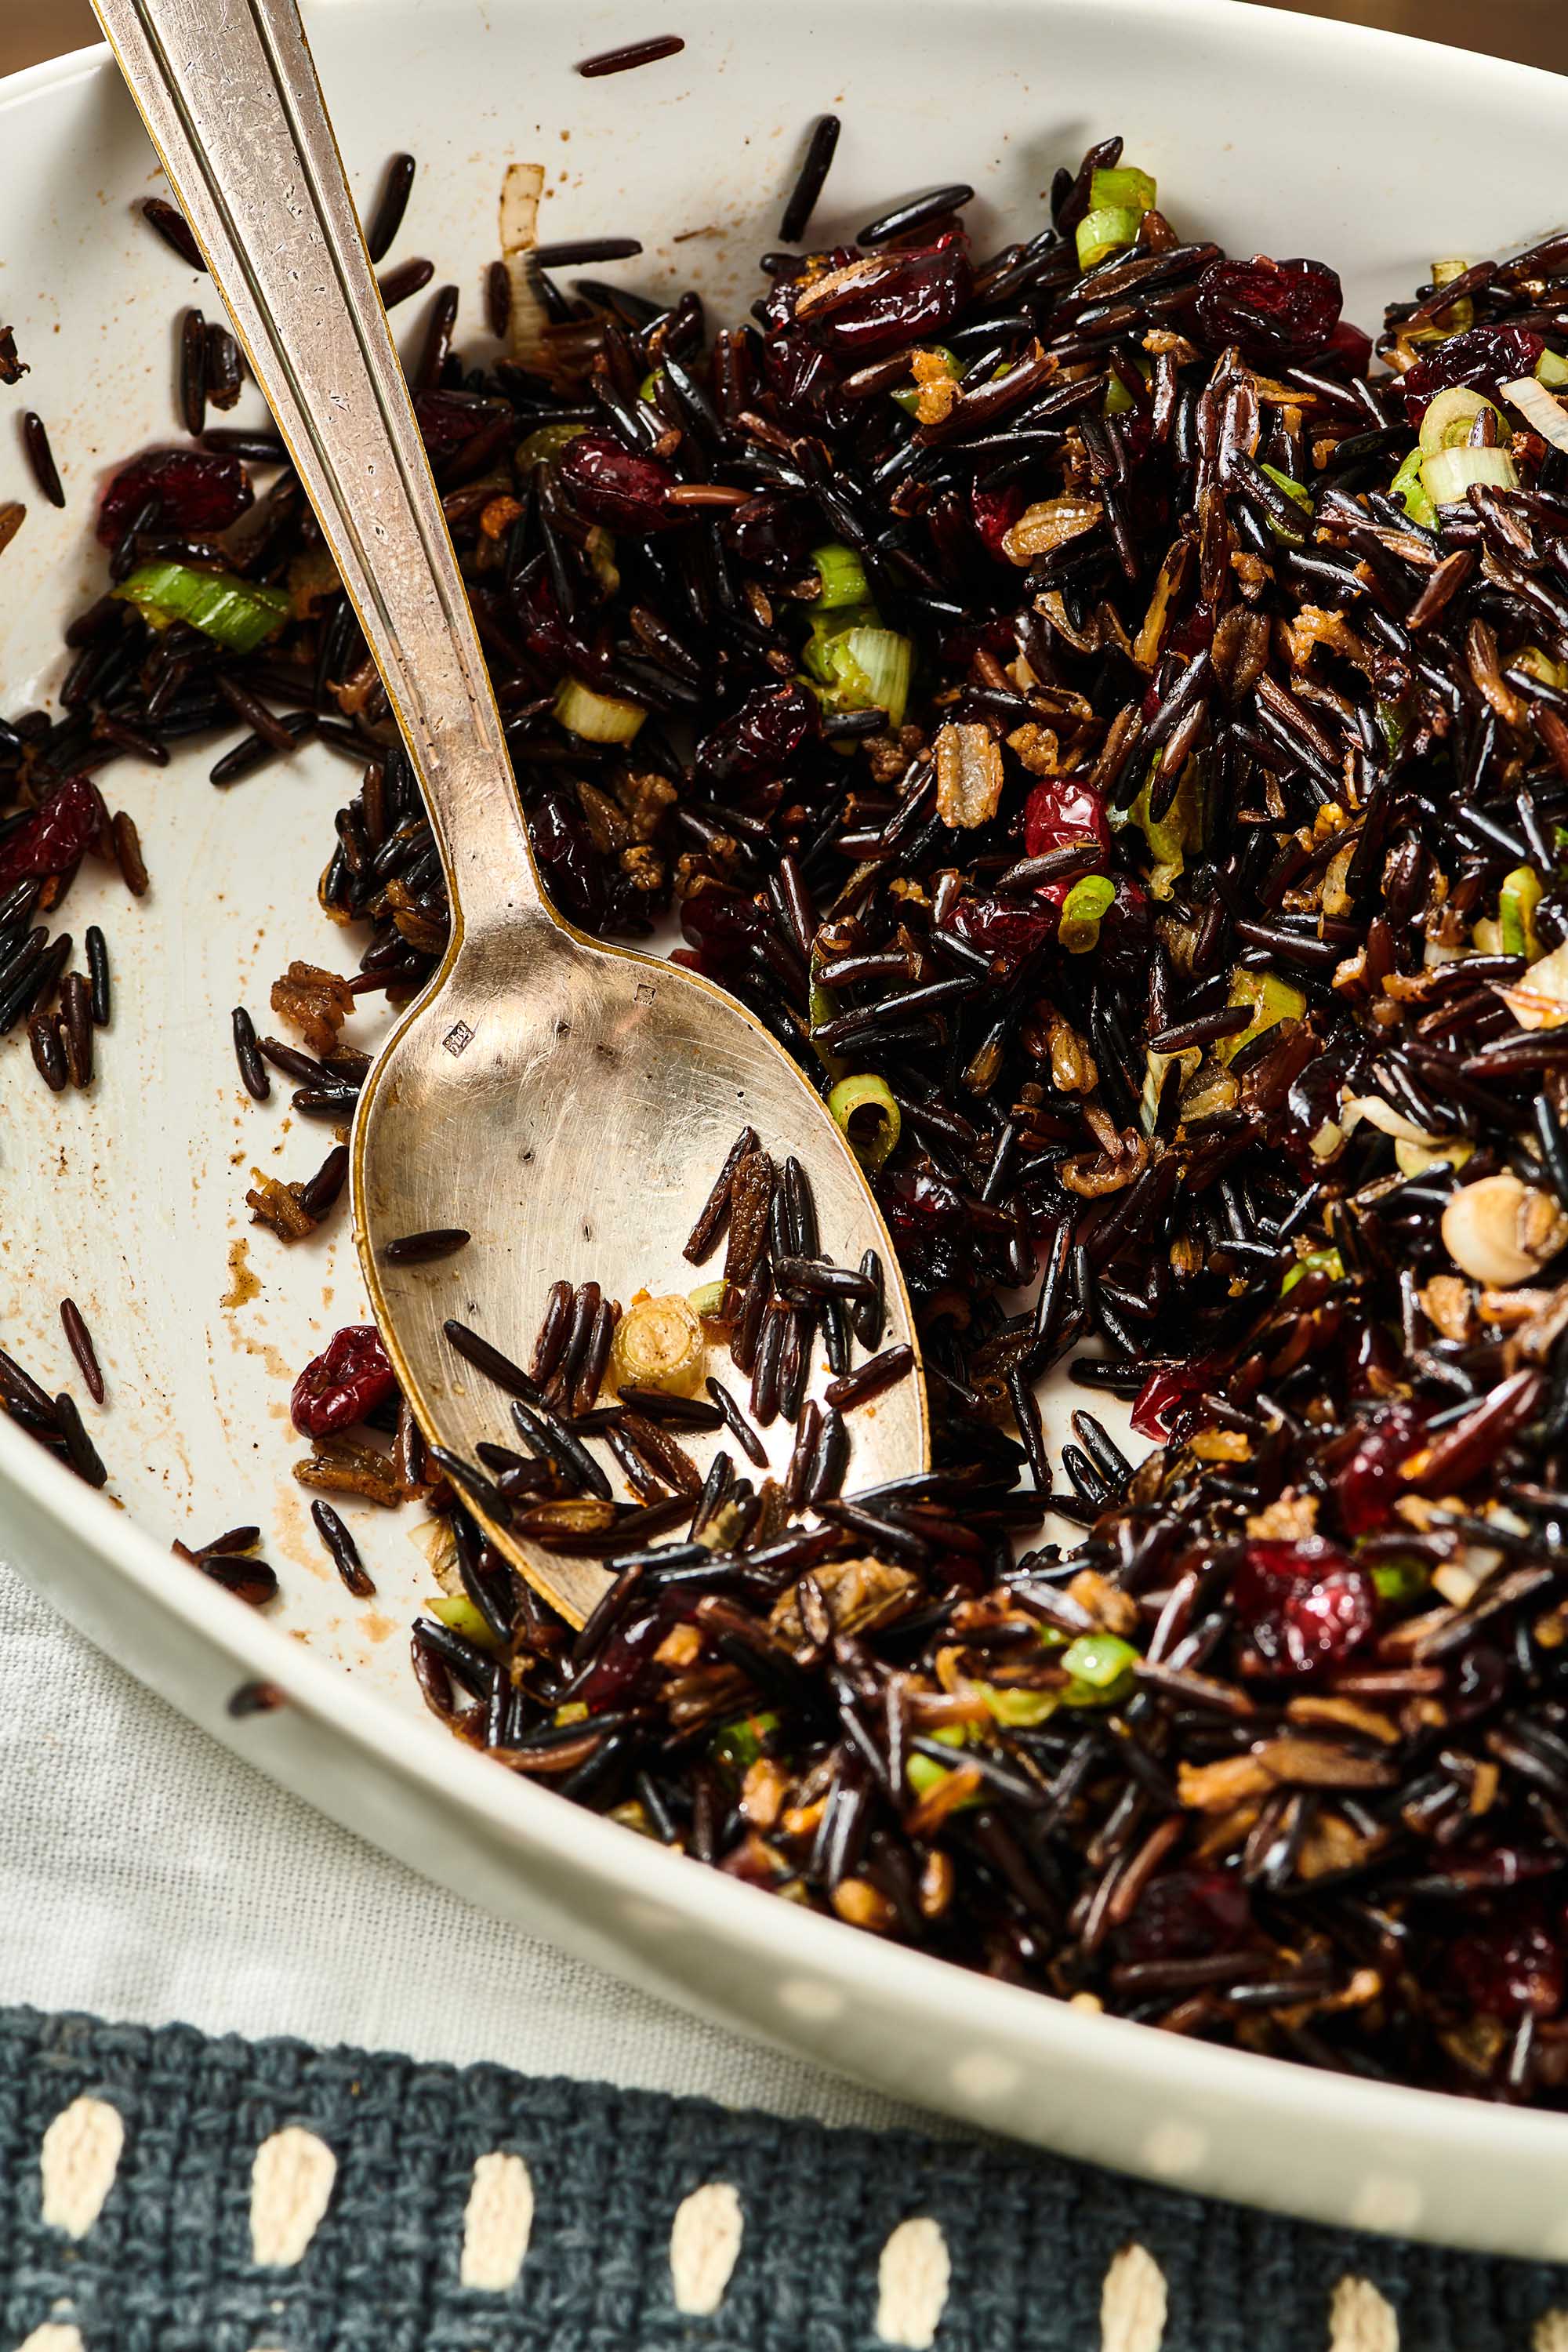 Spoon in a white dish of Wild Rice Salad with Cranberries.